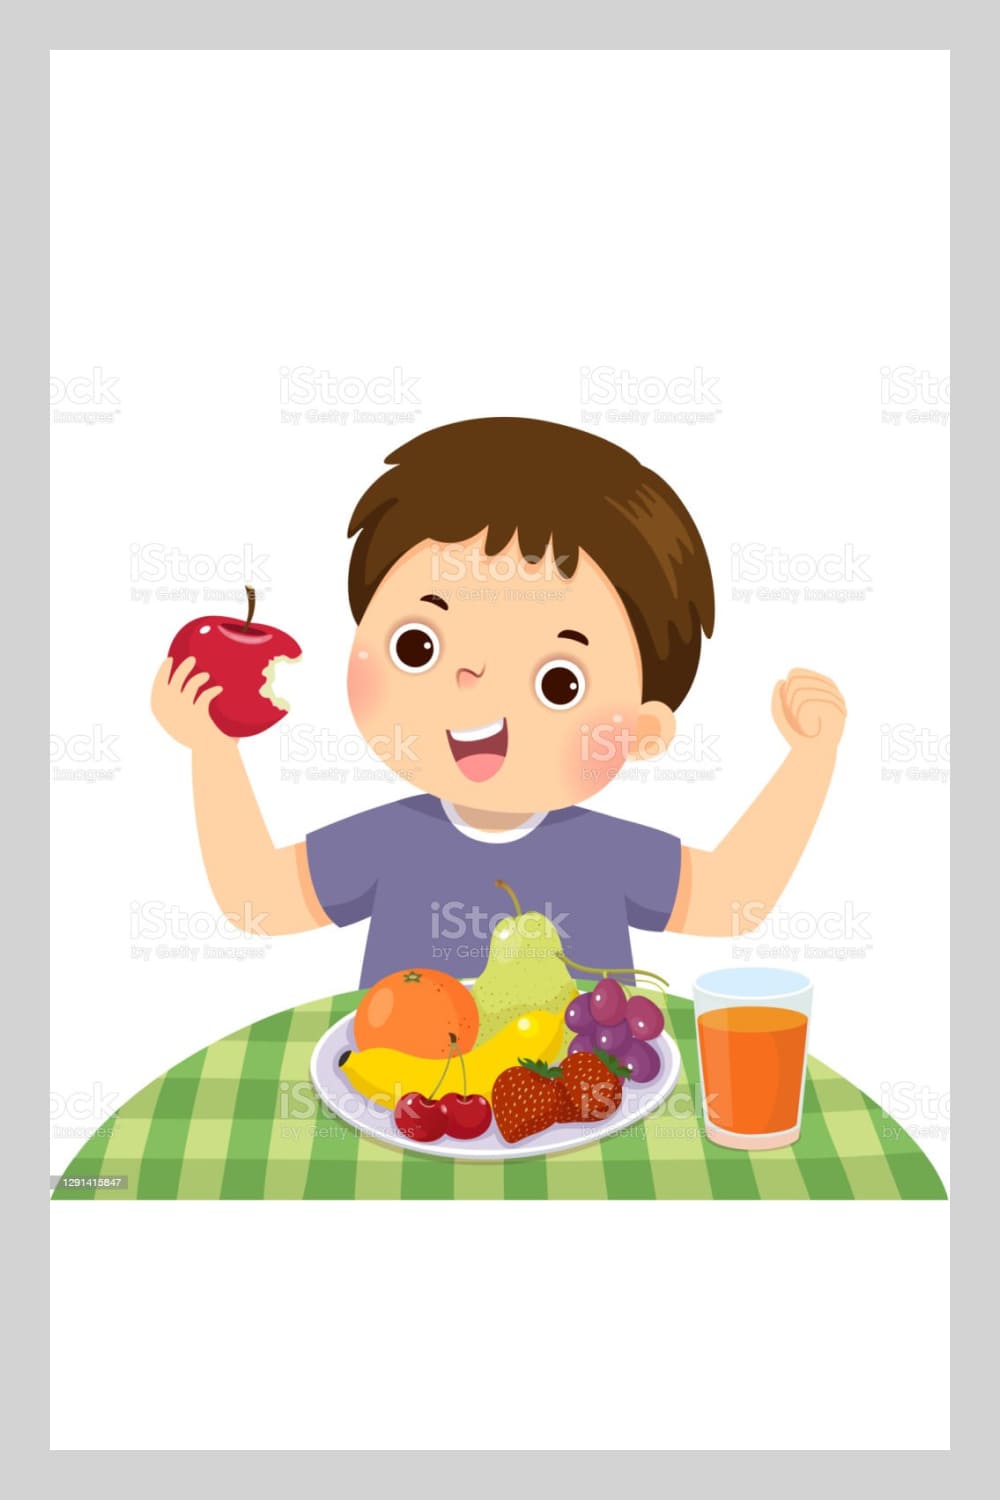 Vector illustration cartoon of a little boy eating red apple and showing his strength. stock illustration.